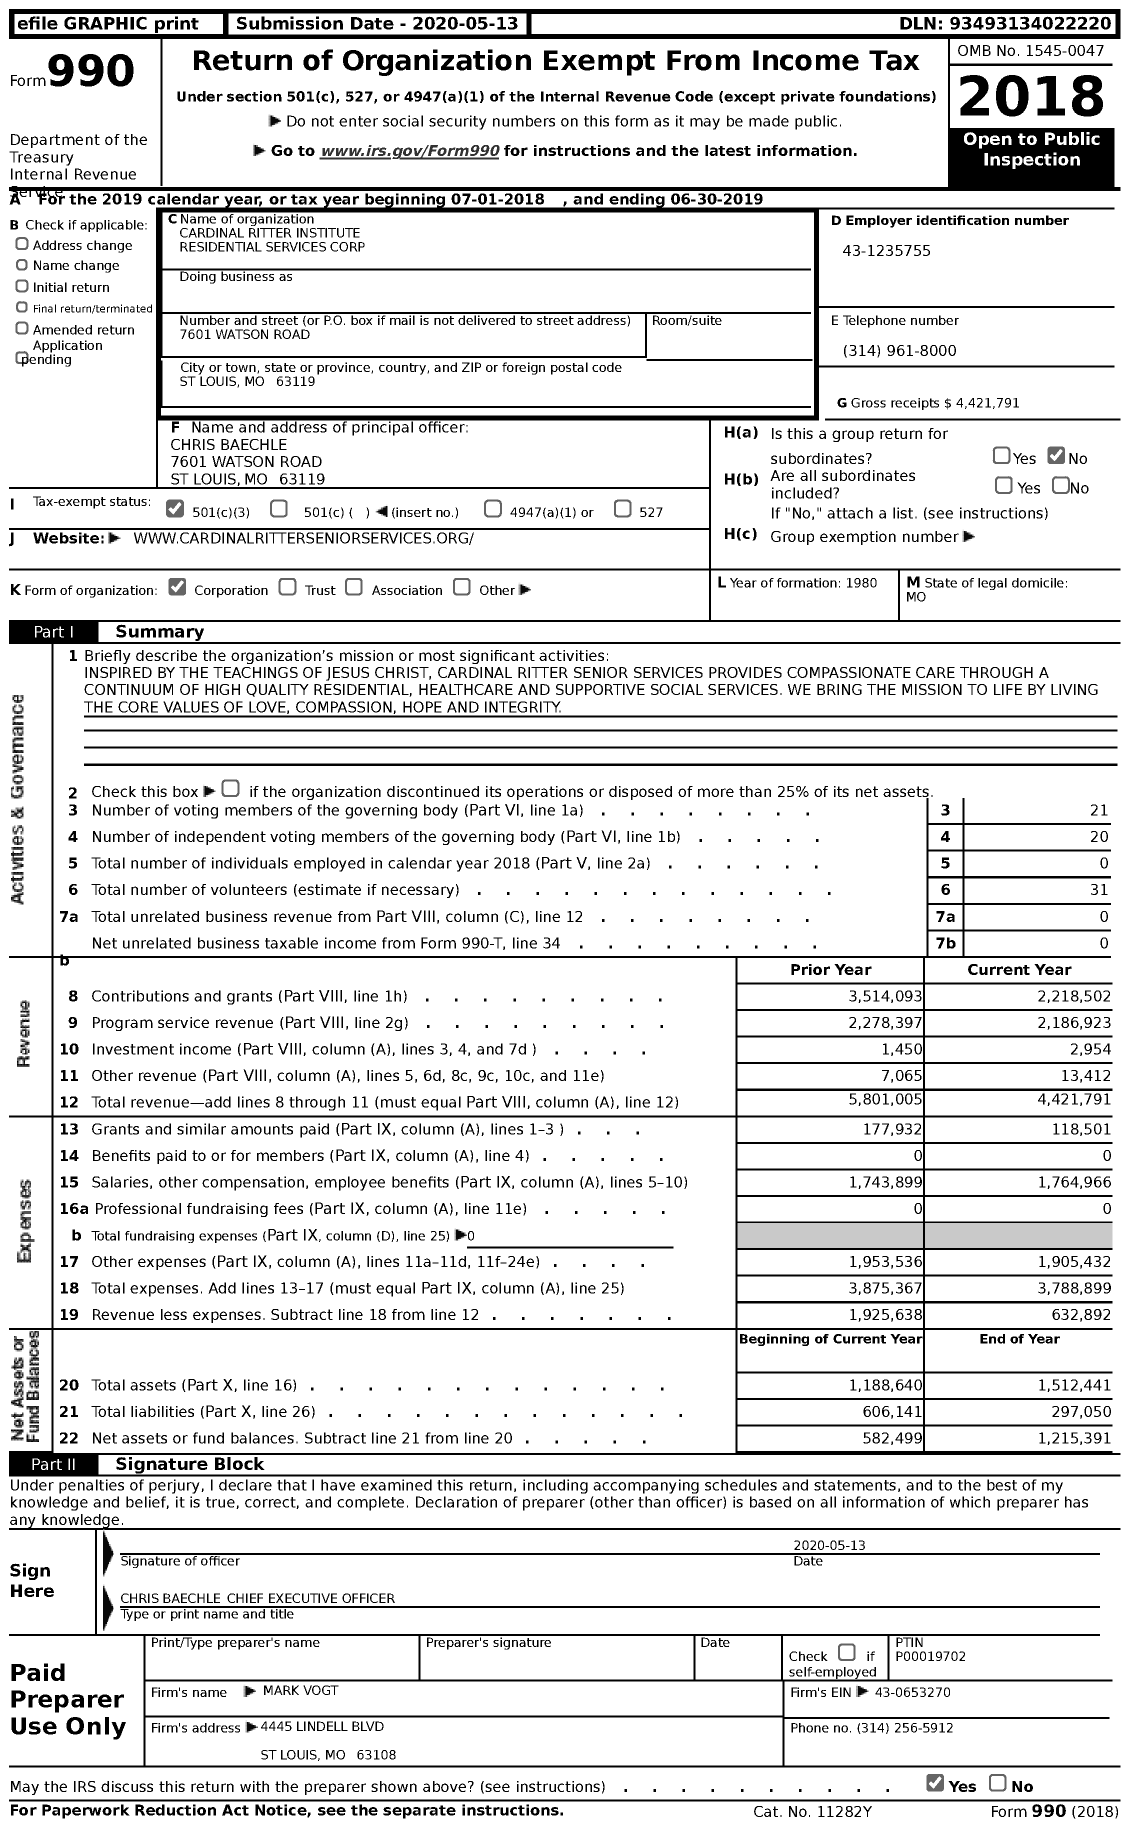 Image of first page of 2018 Form 990 for Cardinal Ritter Institute Residential Services Corporation